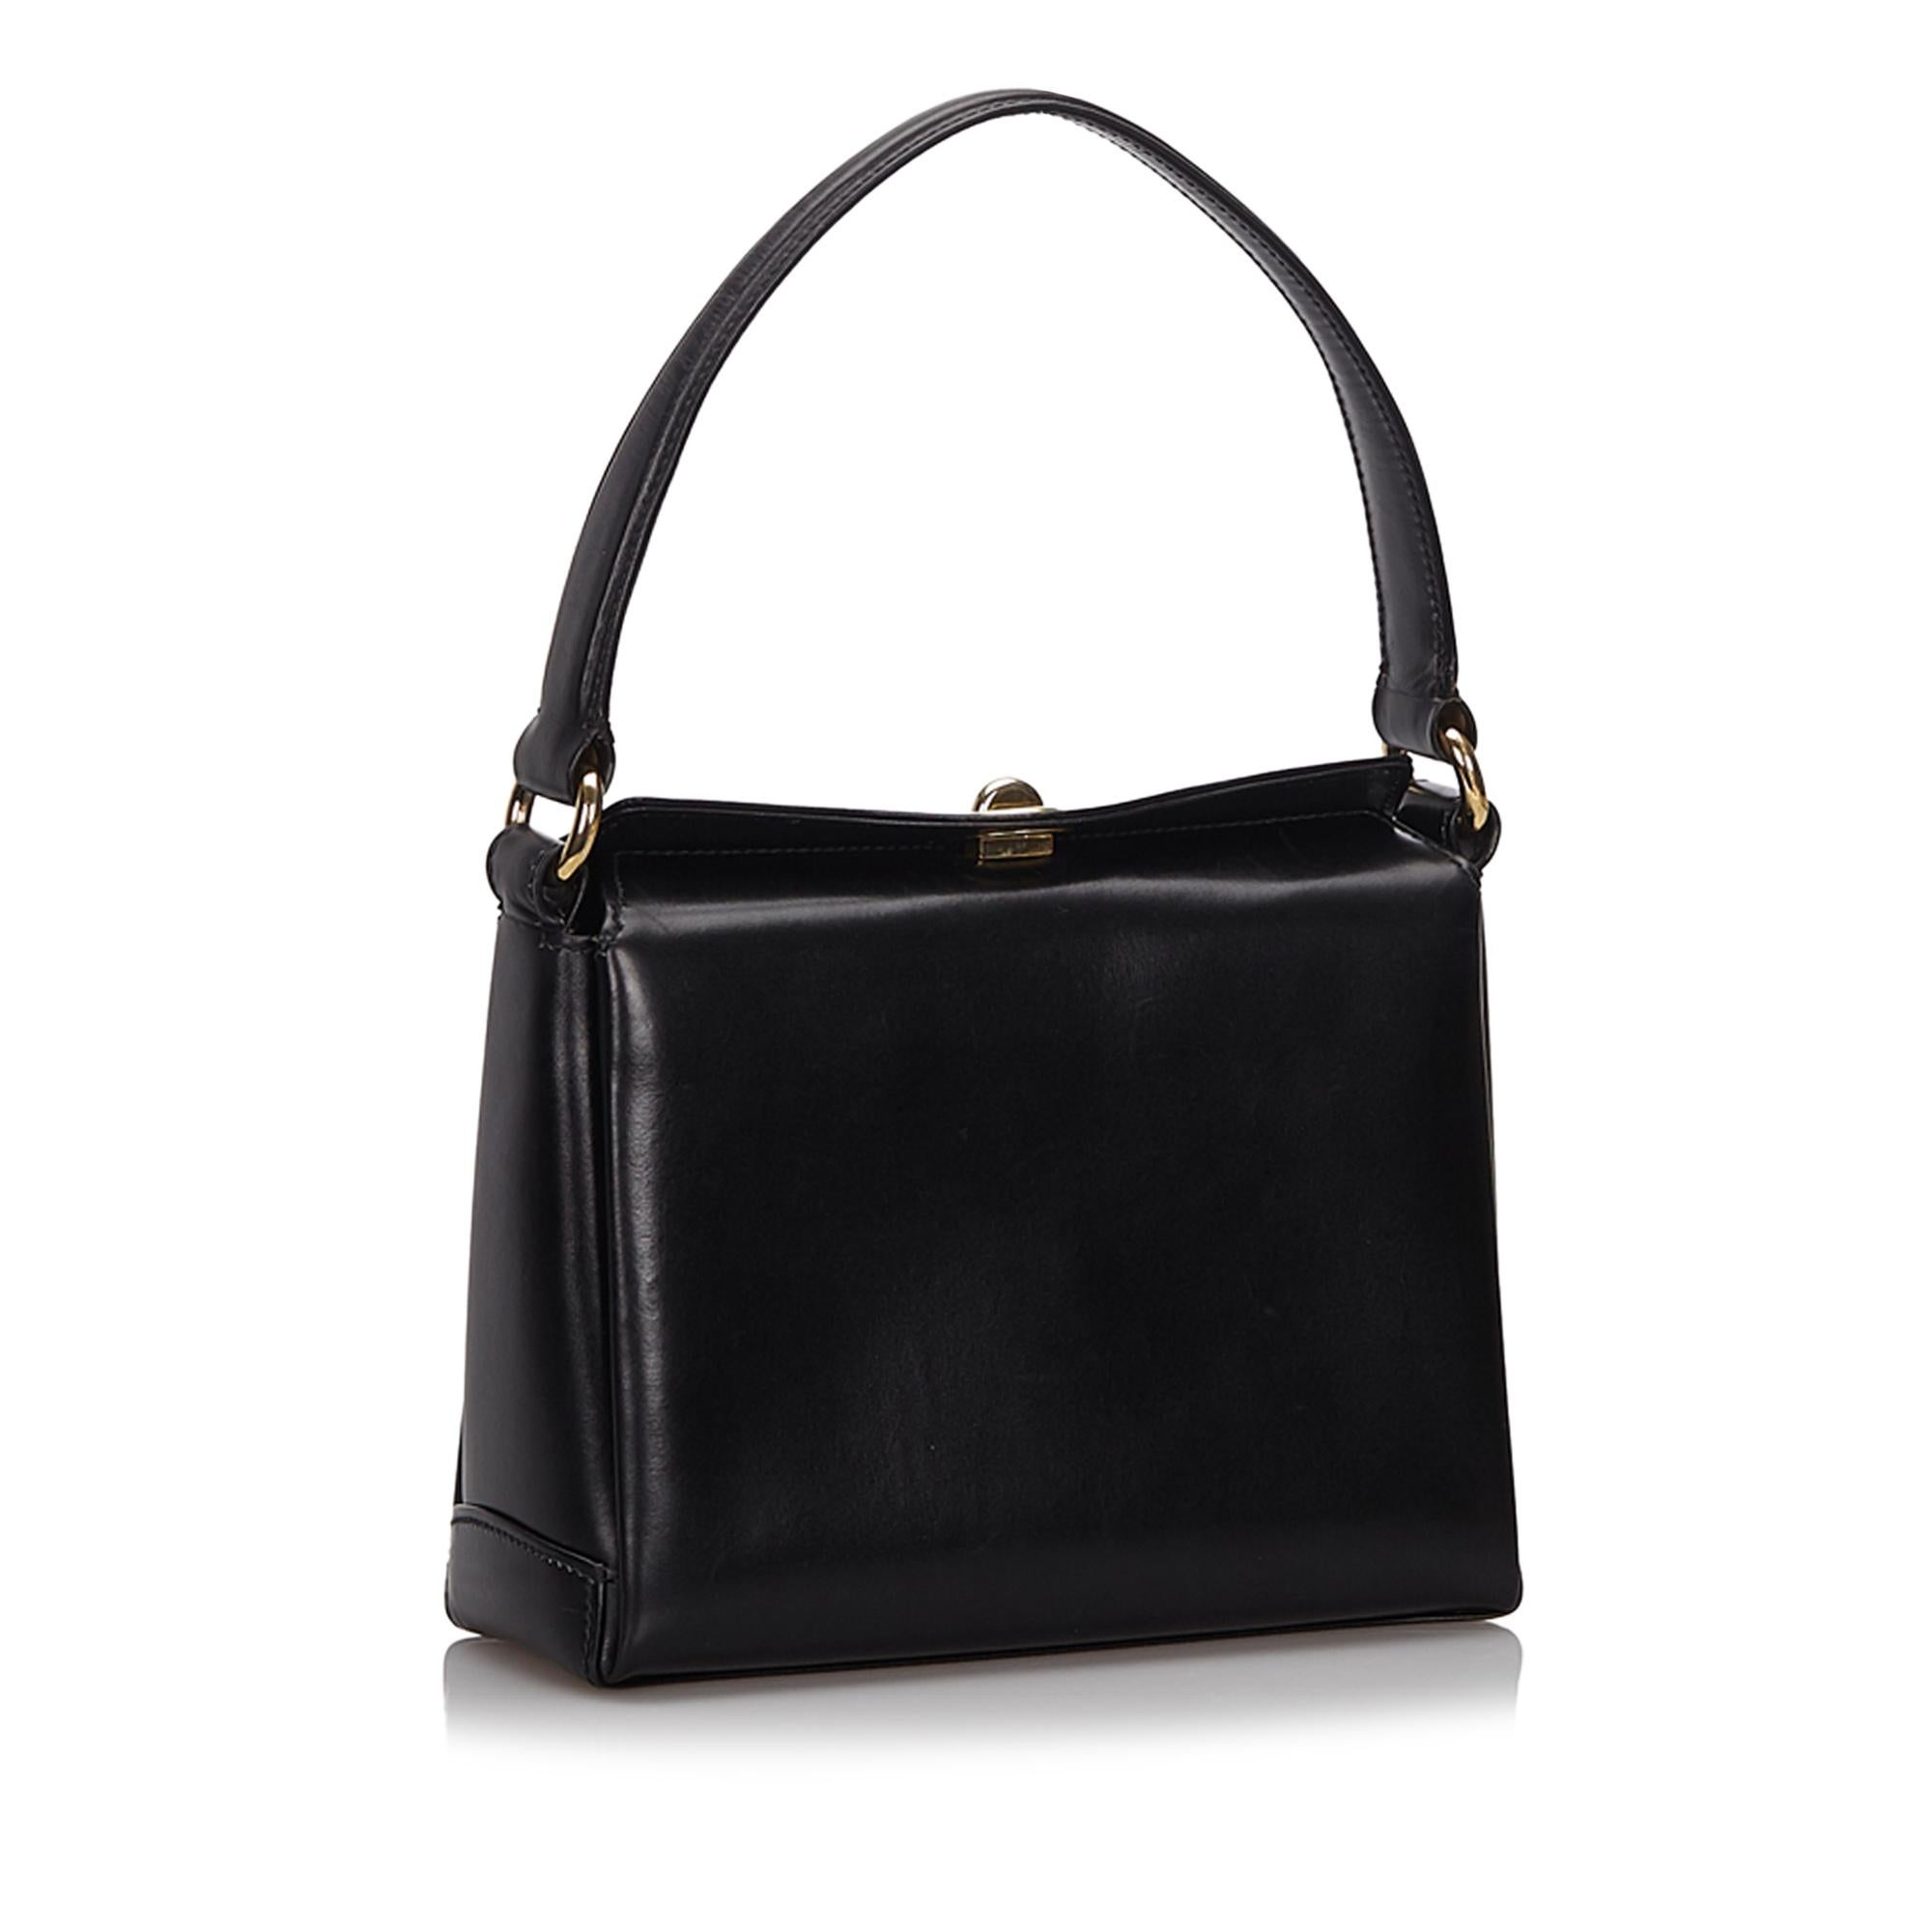 This handbag features a leather body, a flat strap, a fold over top with a metal twist lock closure, and an interior slip pocket. It carries as B+ condition rating.

Inclusions: 
This item does not come with inclusions.

Dimensions:
Length: 16.00